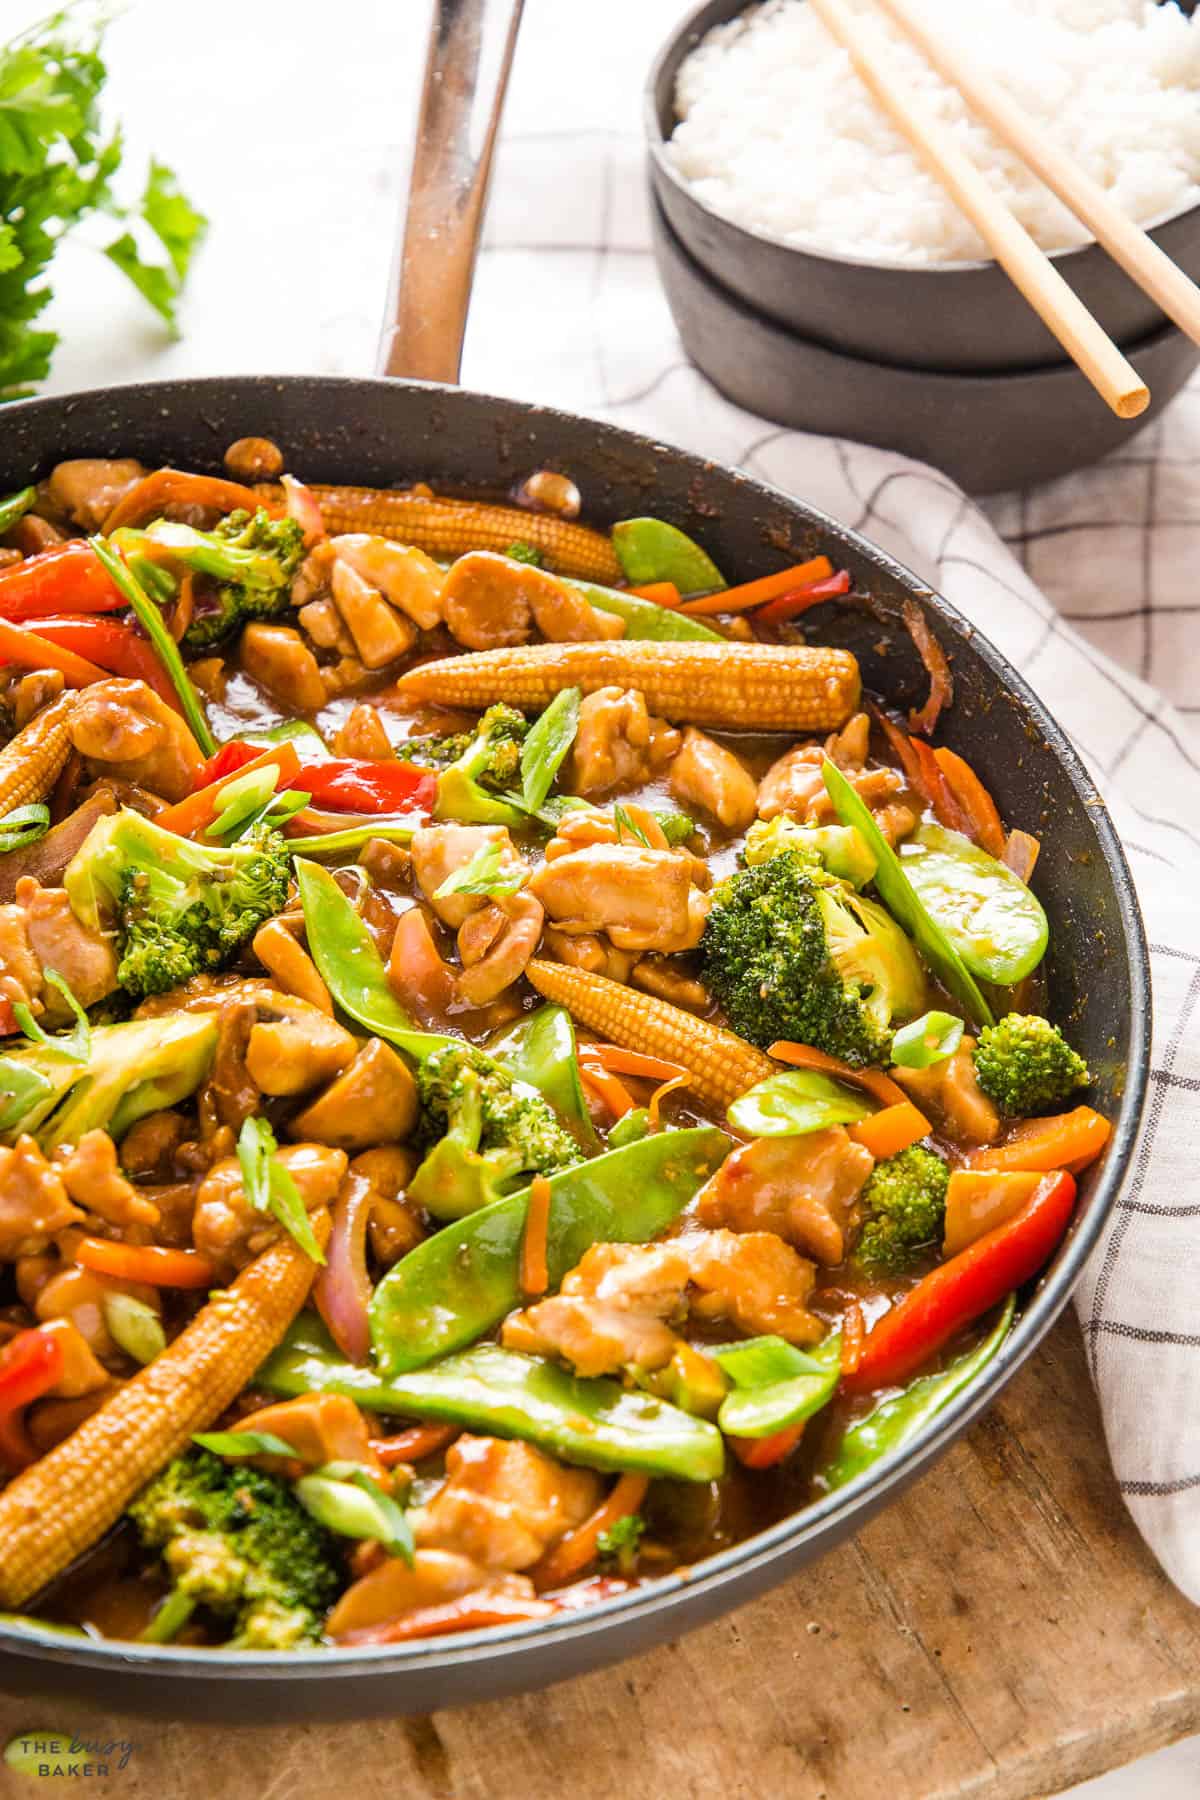 healthy family meal in a skillet with veggies